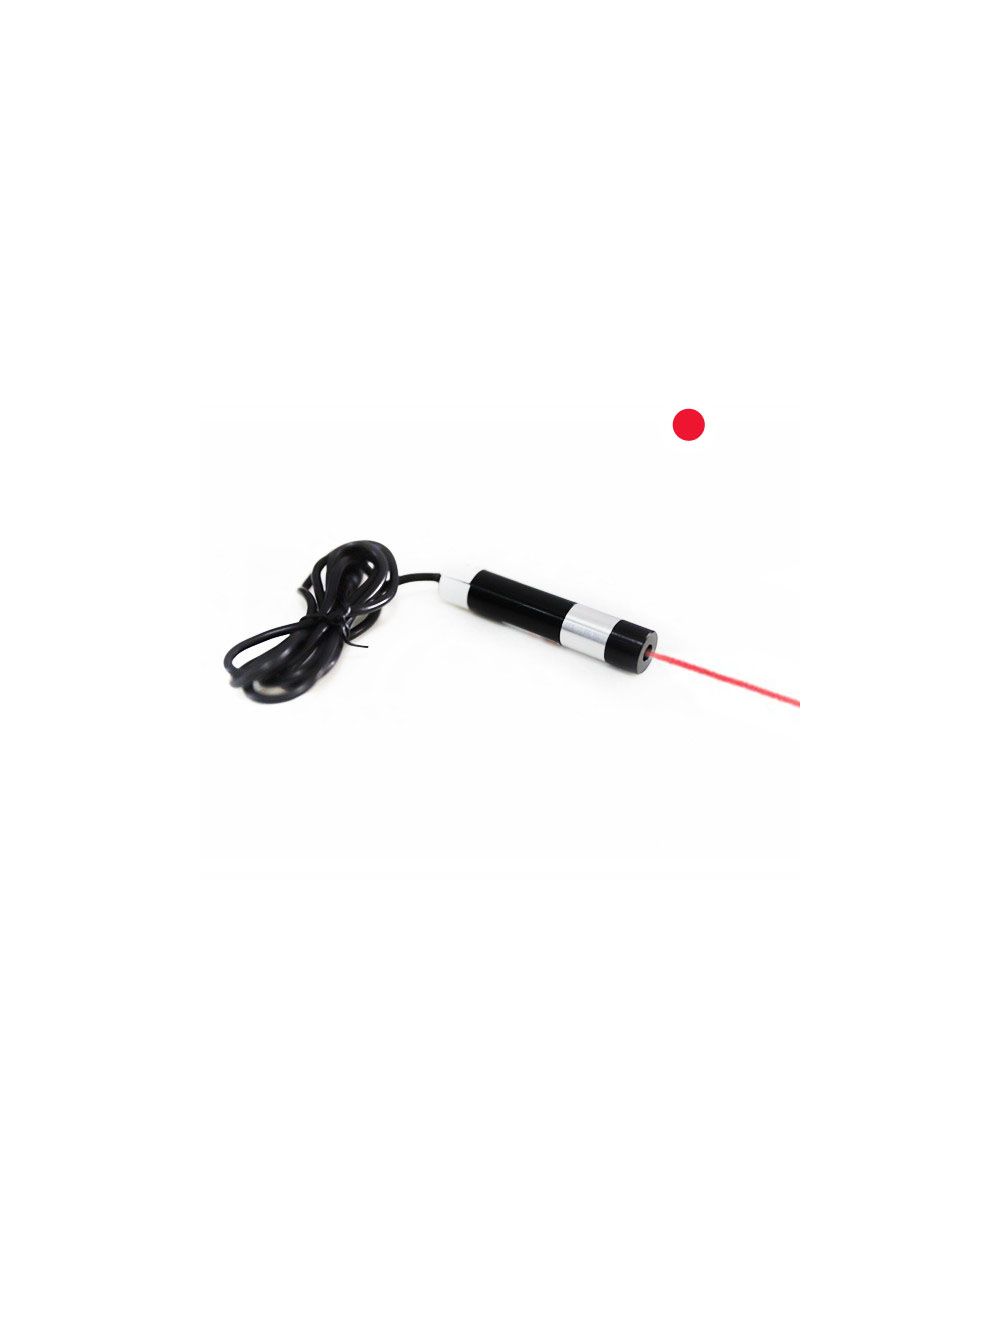 Diodes laser à onde continue (Rouges) - Diodes Lasers cw